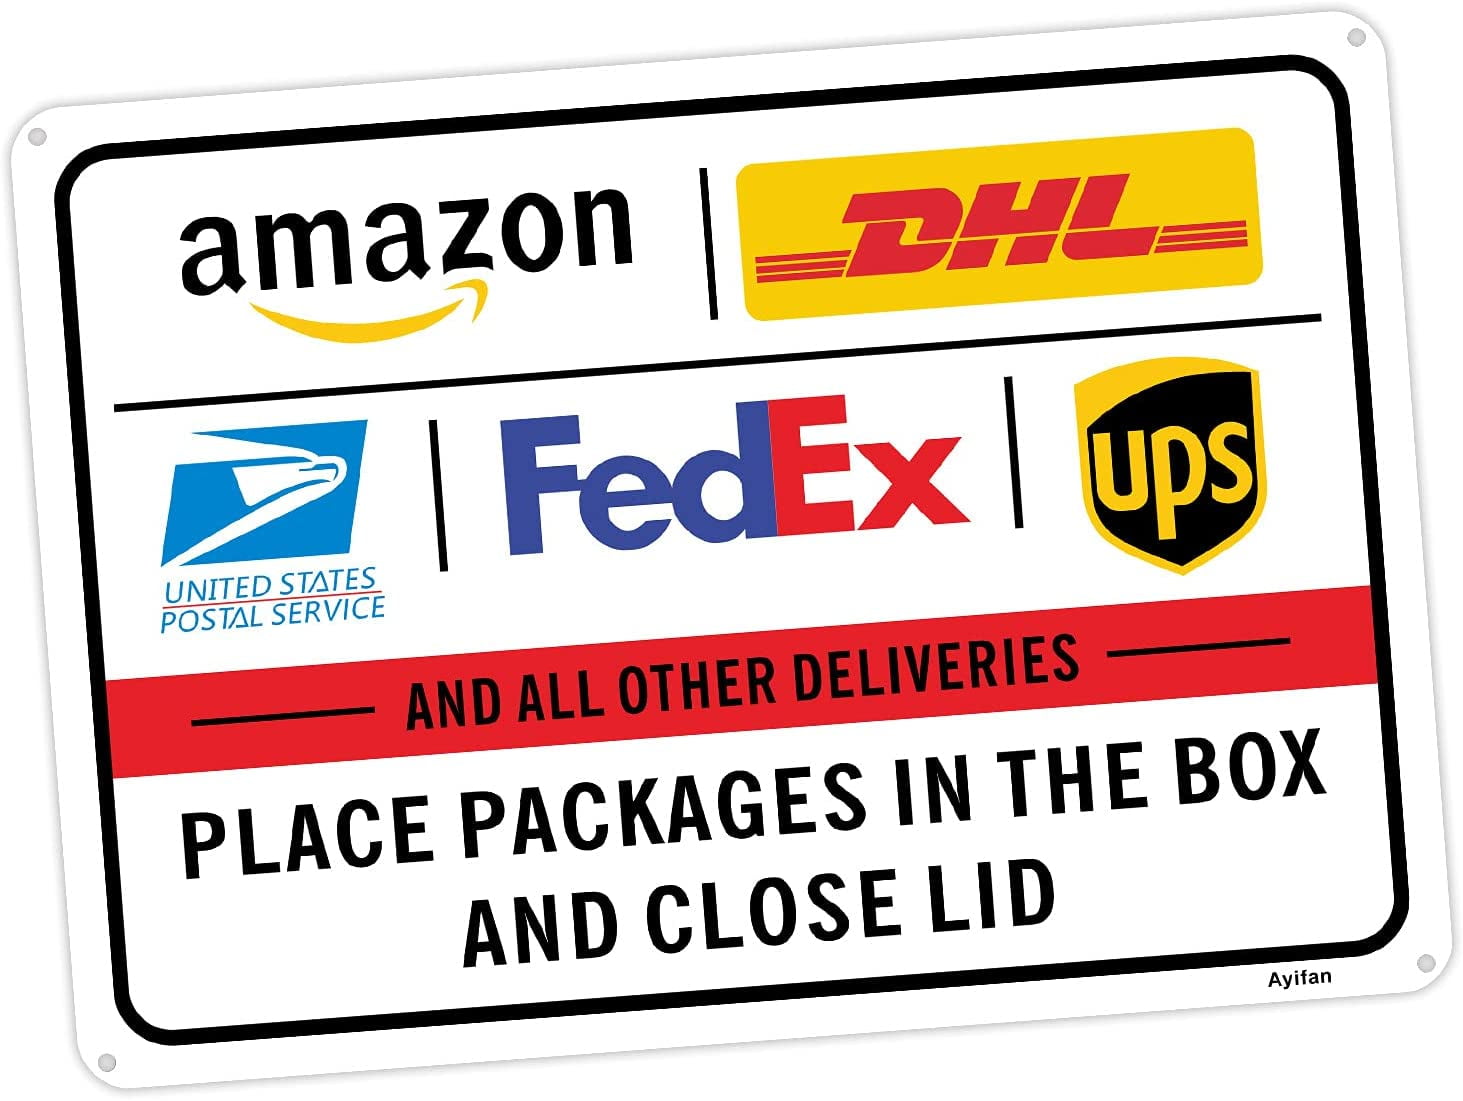 UPS METAL SIGN WITH AMAZON AND UNITED STATES POSTAL 14" X 10" FED EX 